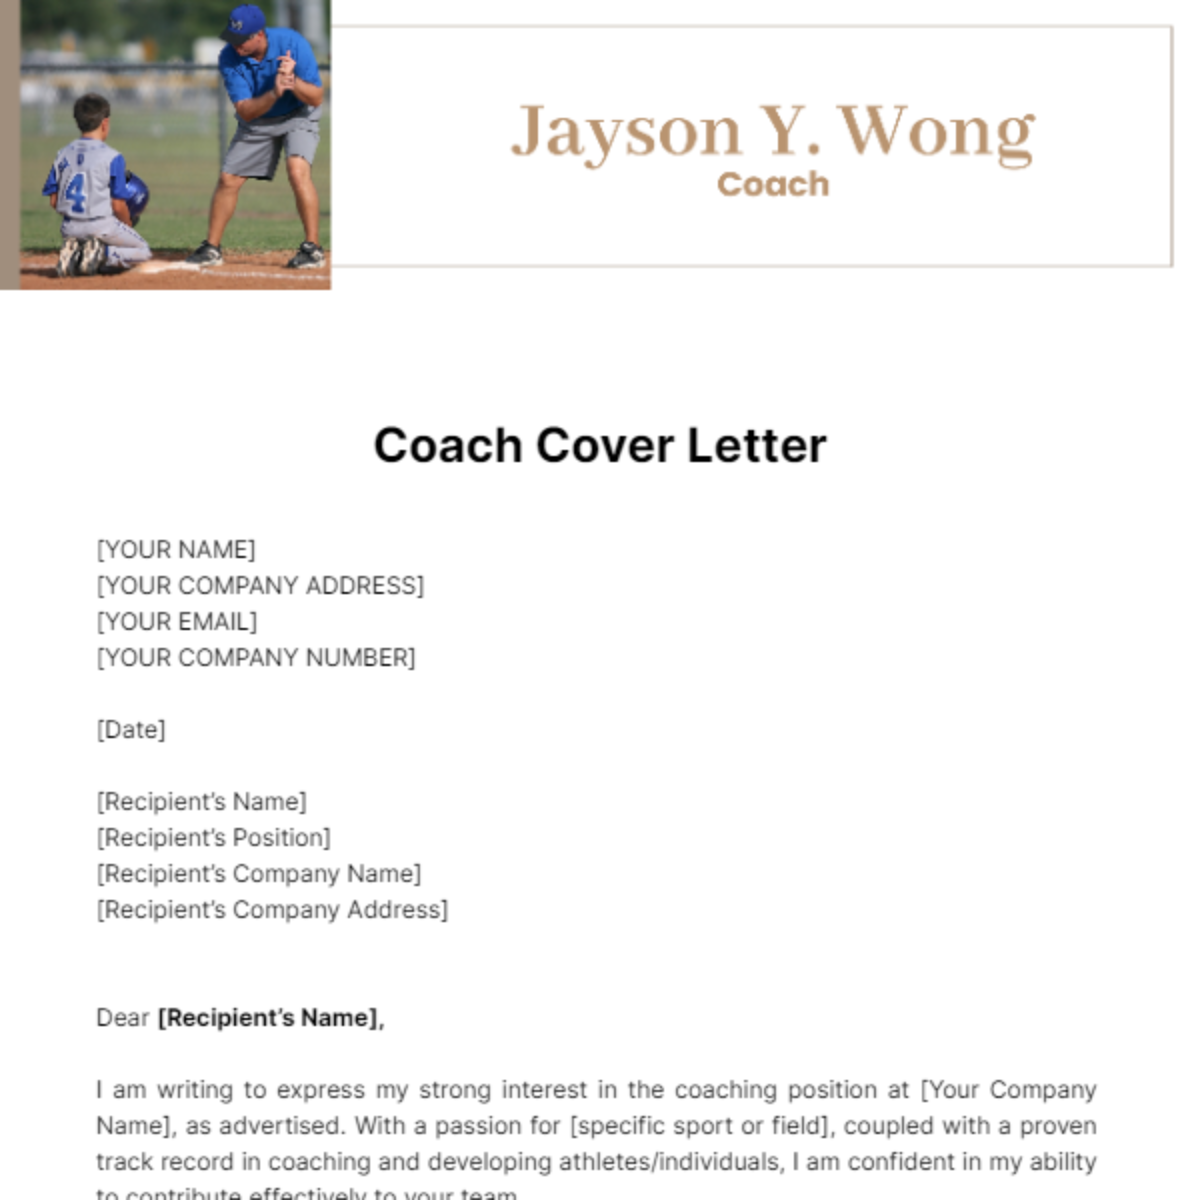 Coach Cover Letter Template